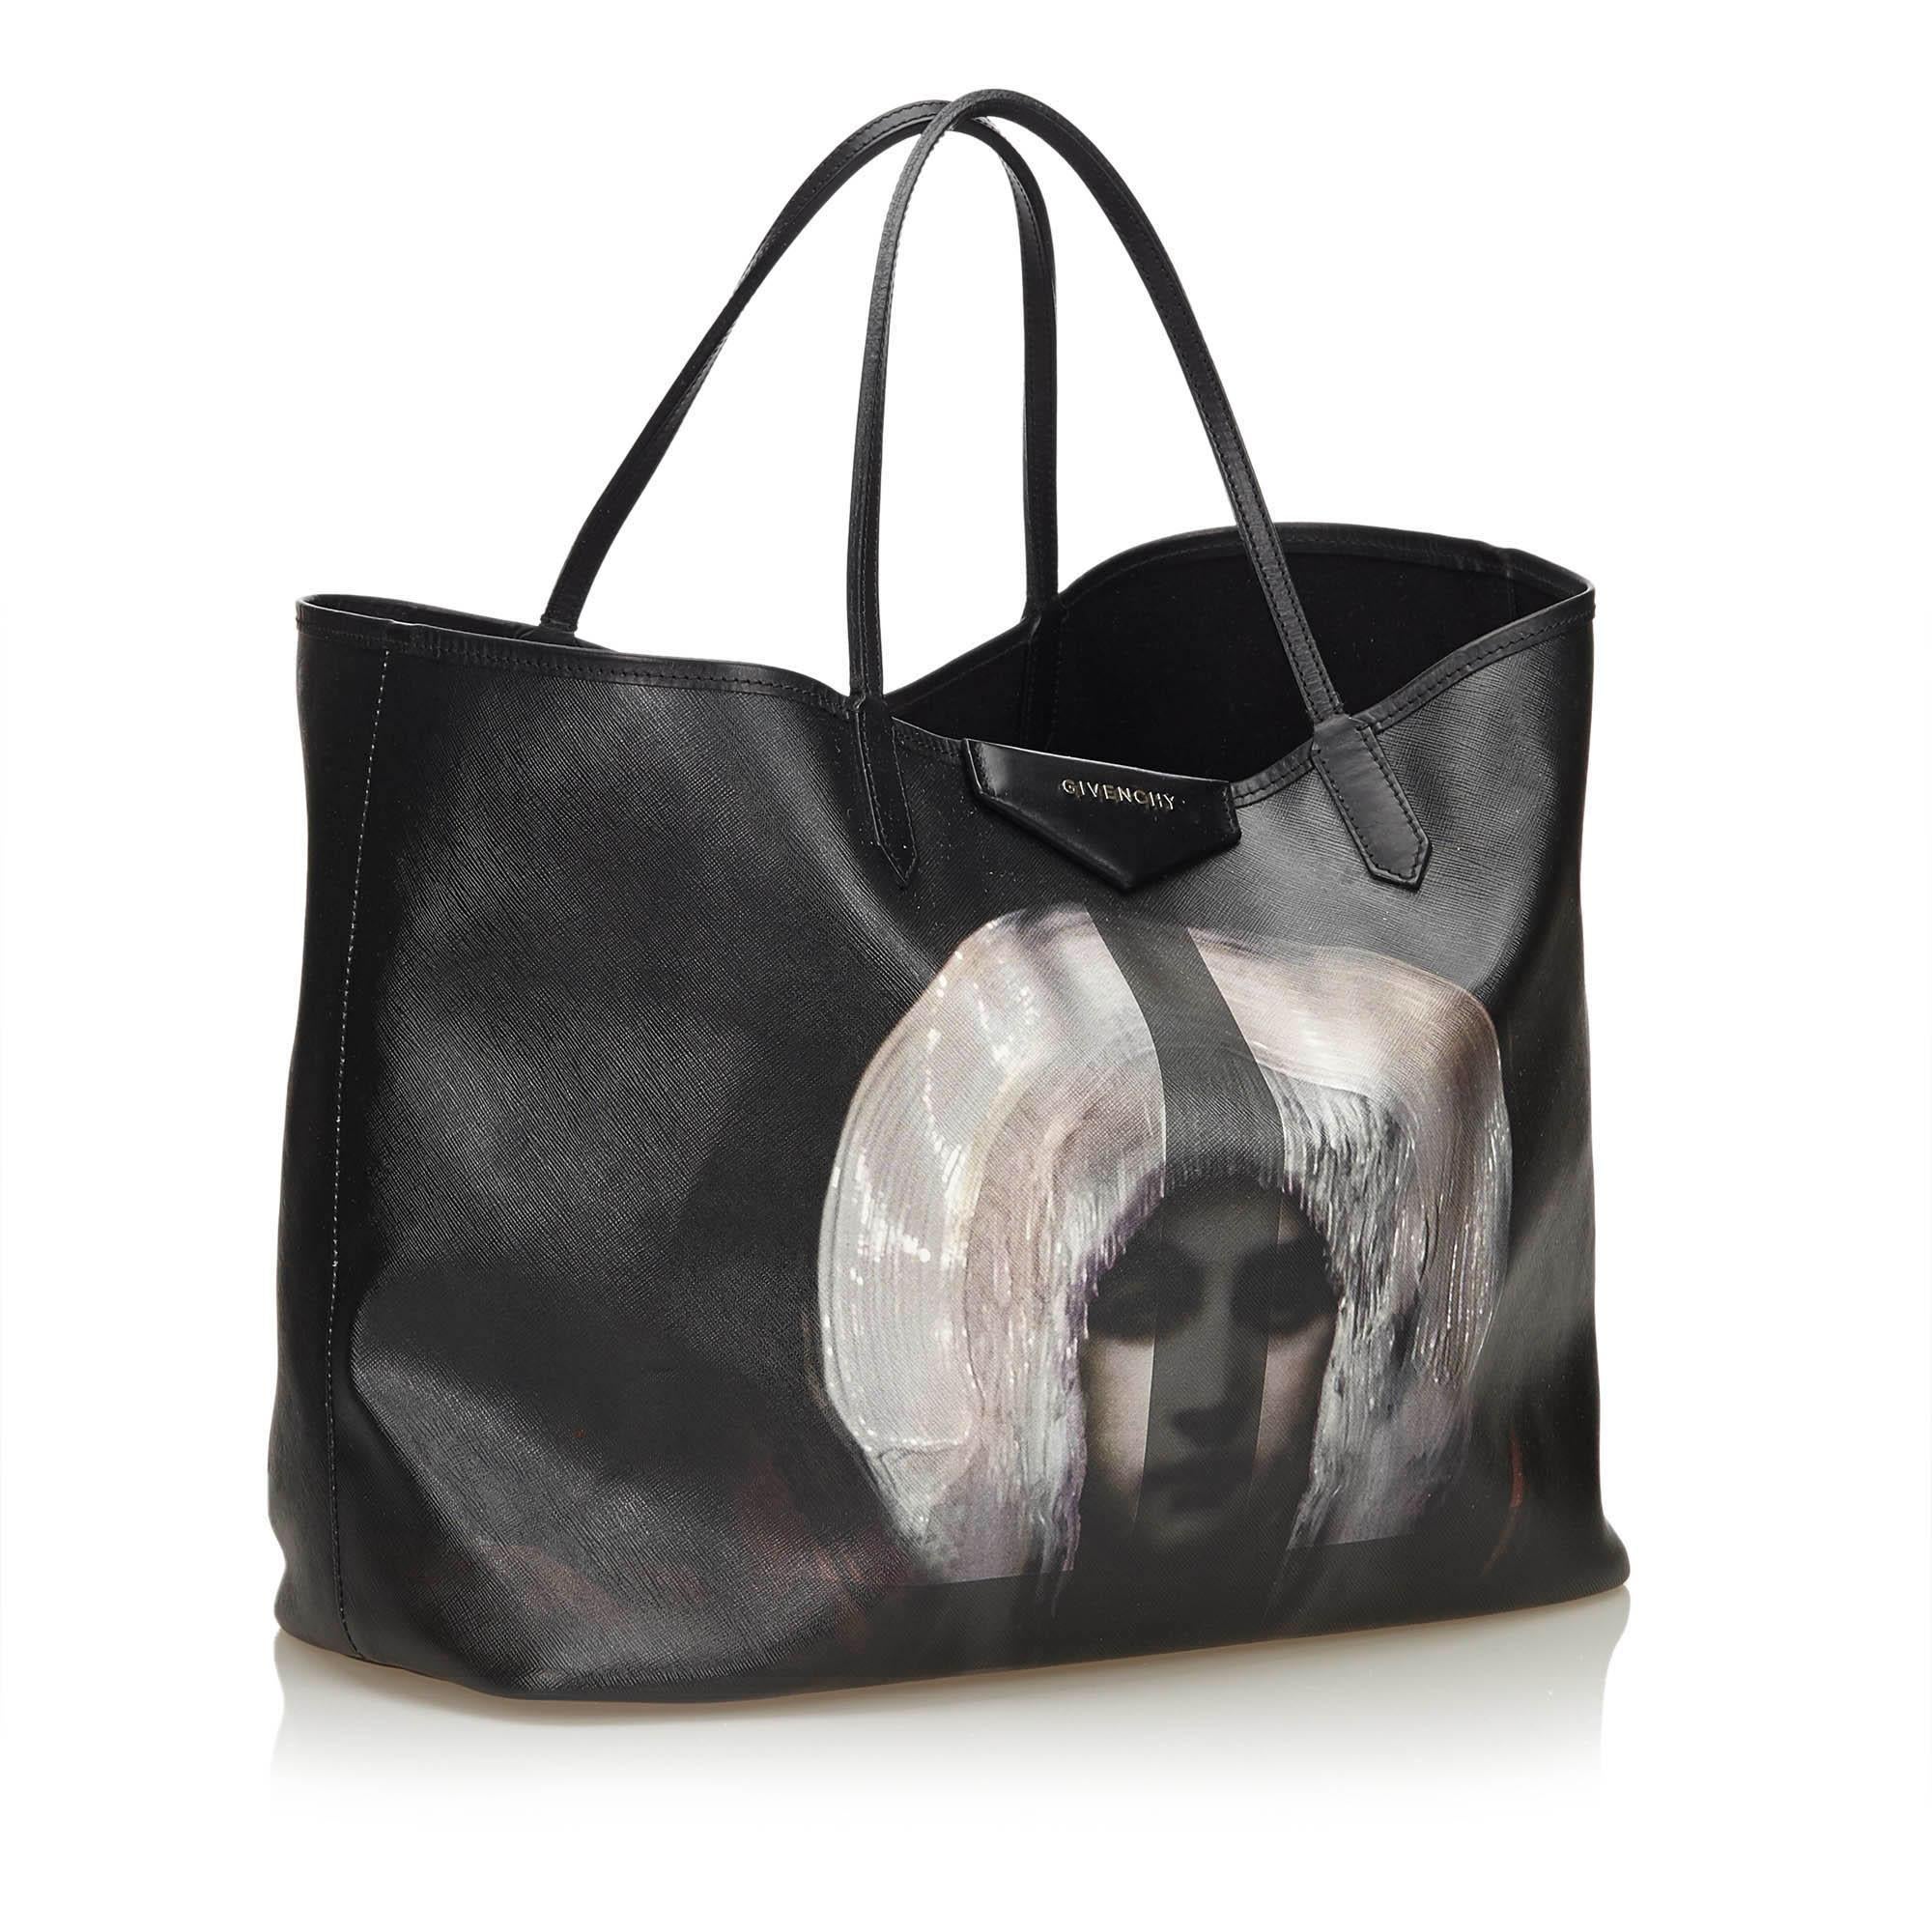 Givenchy PVC Madonna Antigona Large Tote Bag 

- PVC body 
- Leather trim
- flat straps, open top
- Madonna print

Item authenticated by HEWI London.

Please kindly contact admin with any questions and a HEWI car service is available in Central